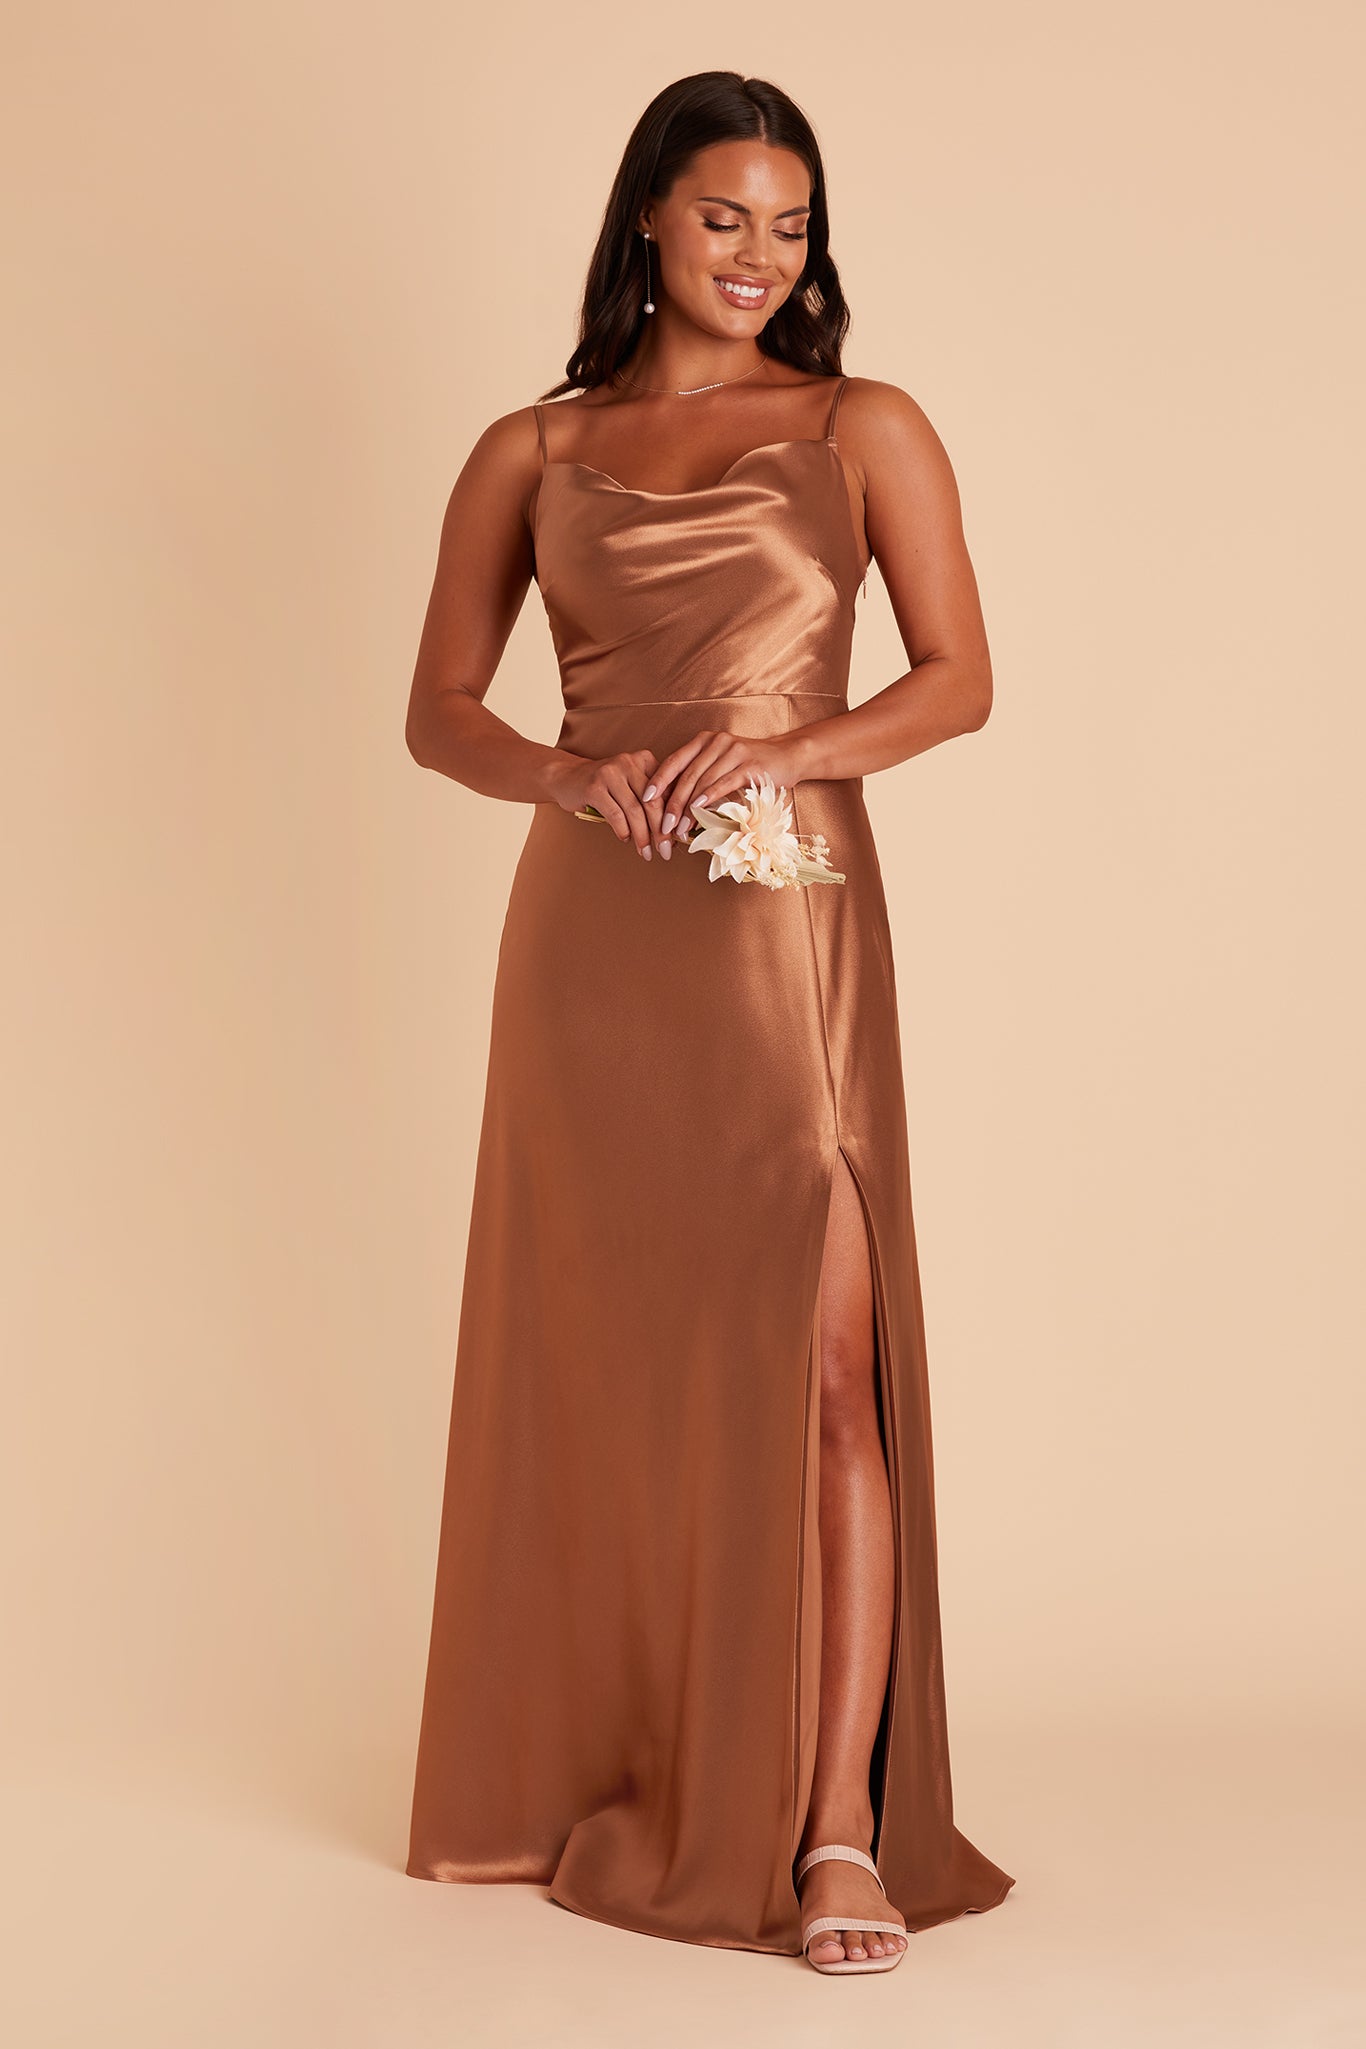 Classic Multiway Infinity Dress in Rust - Evening Dresses | ModelChic